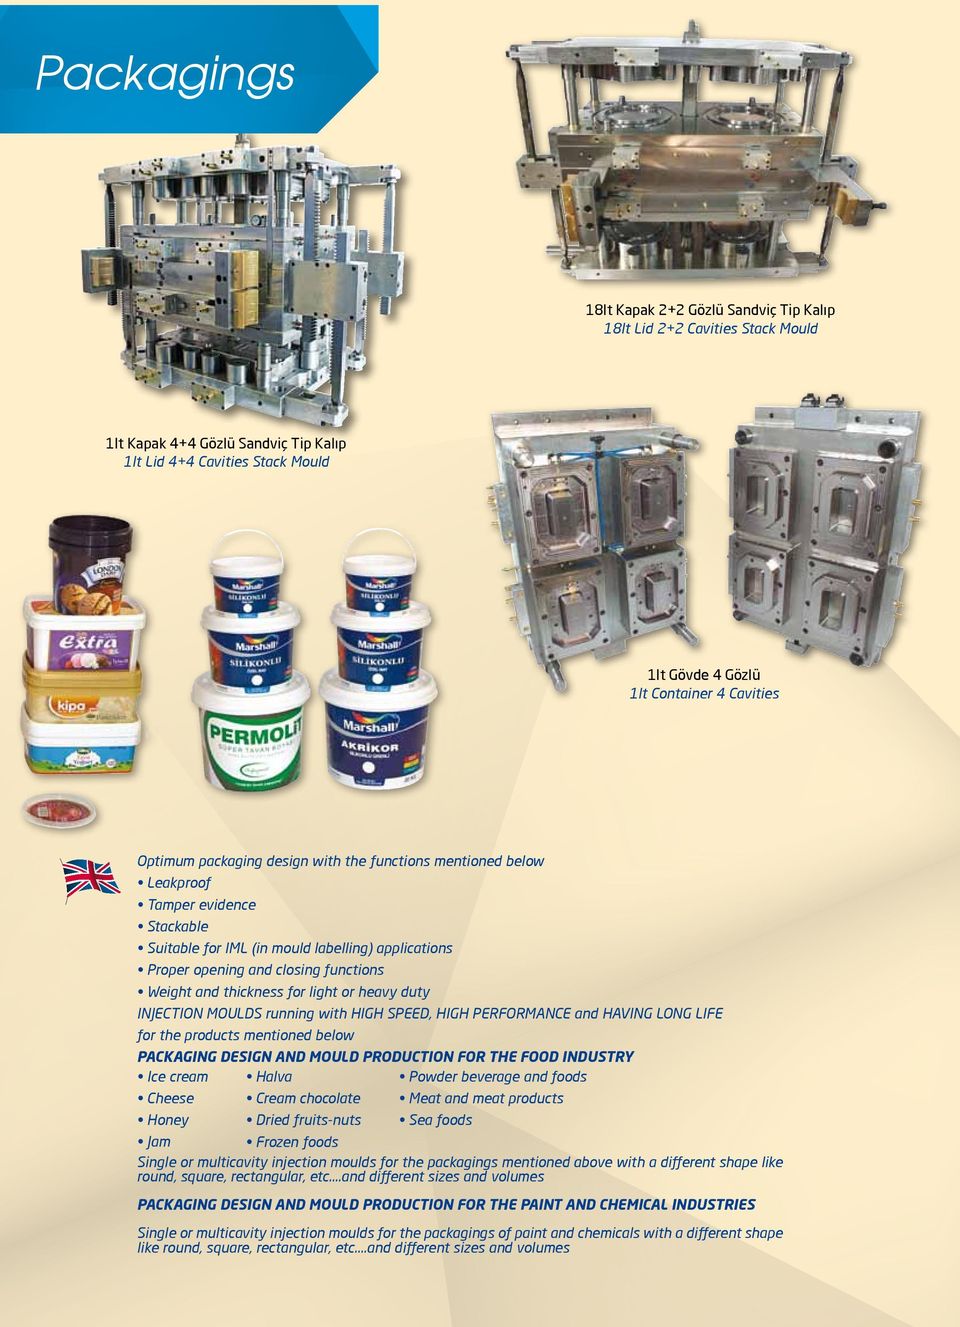 thickness for light or heavy duty INJECTION MOULDS running with HIGH SPEED, HIGH PERFORMANCE and HAVING LONG LIFE for the products mentioned below PACKAGING DESIGN AND MOULD PRODUCTION FOR THE FOOD